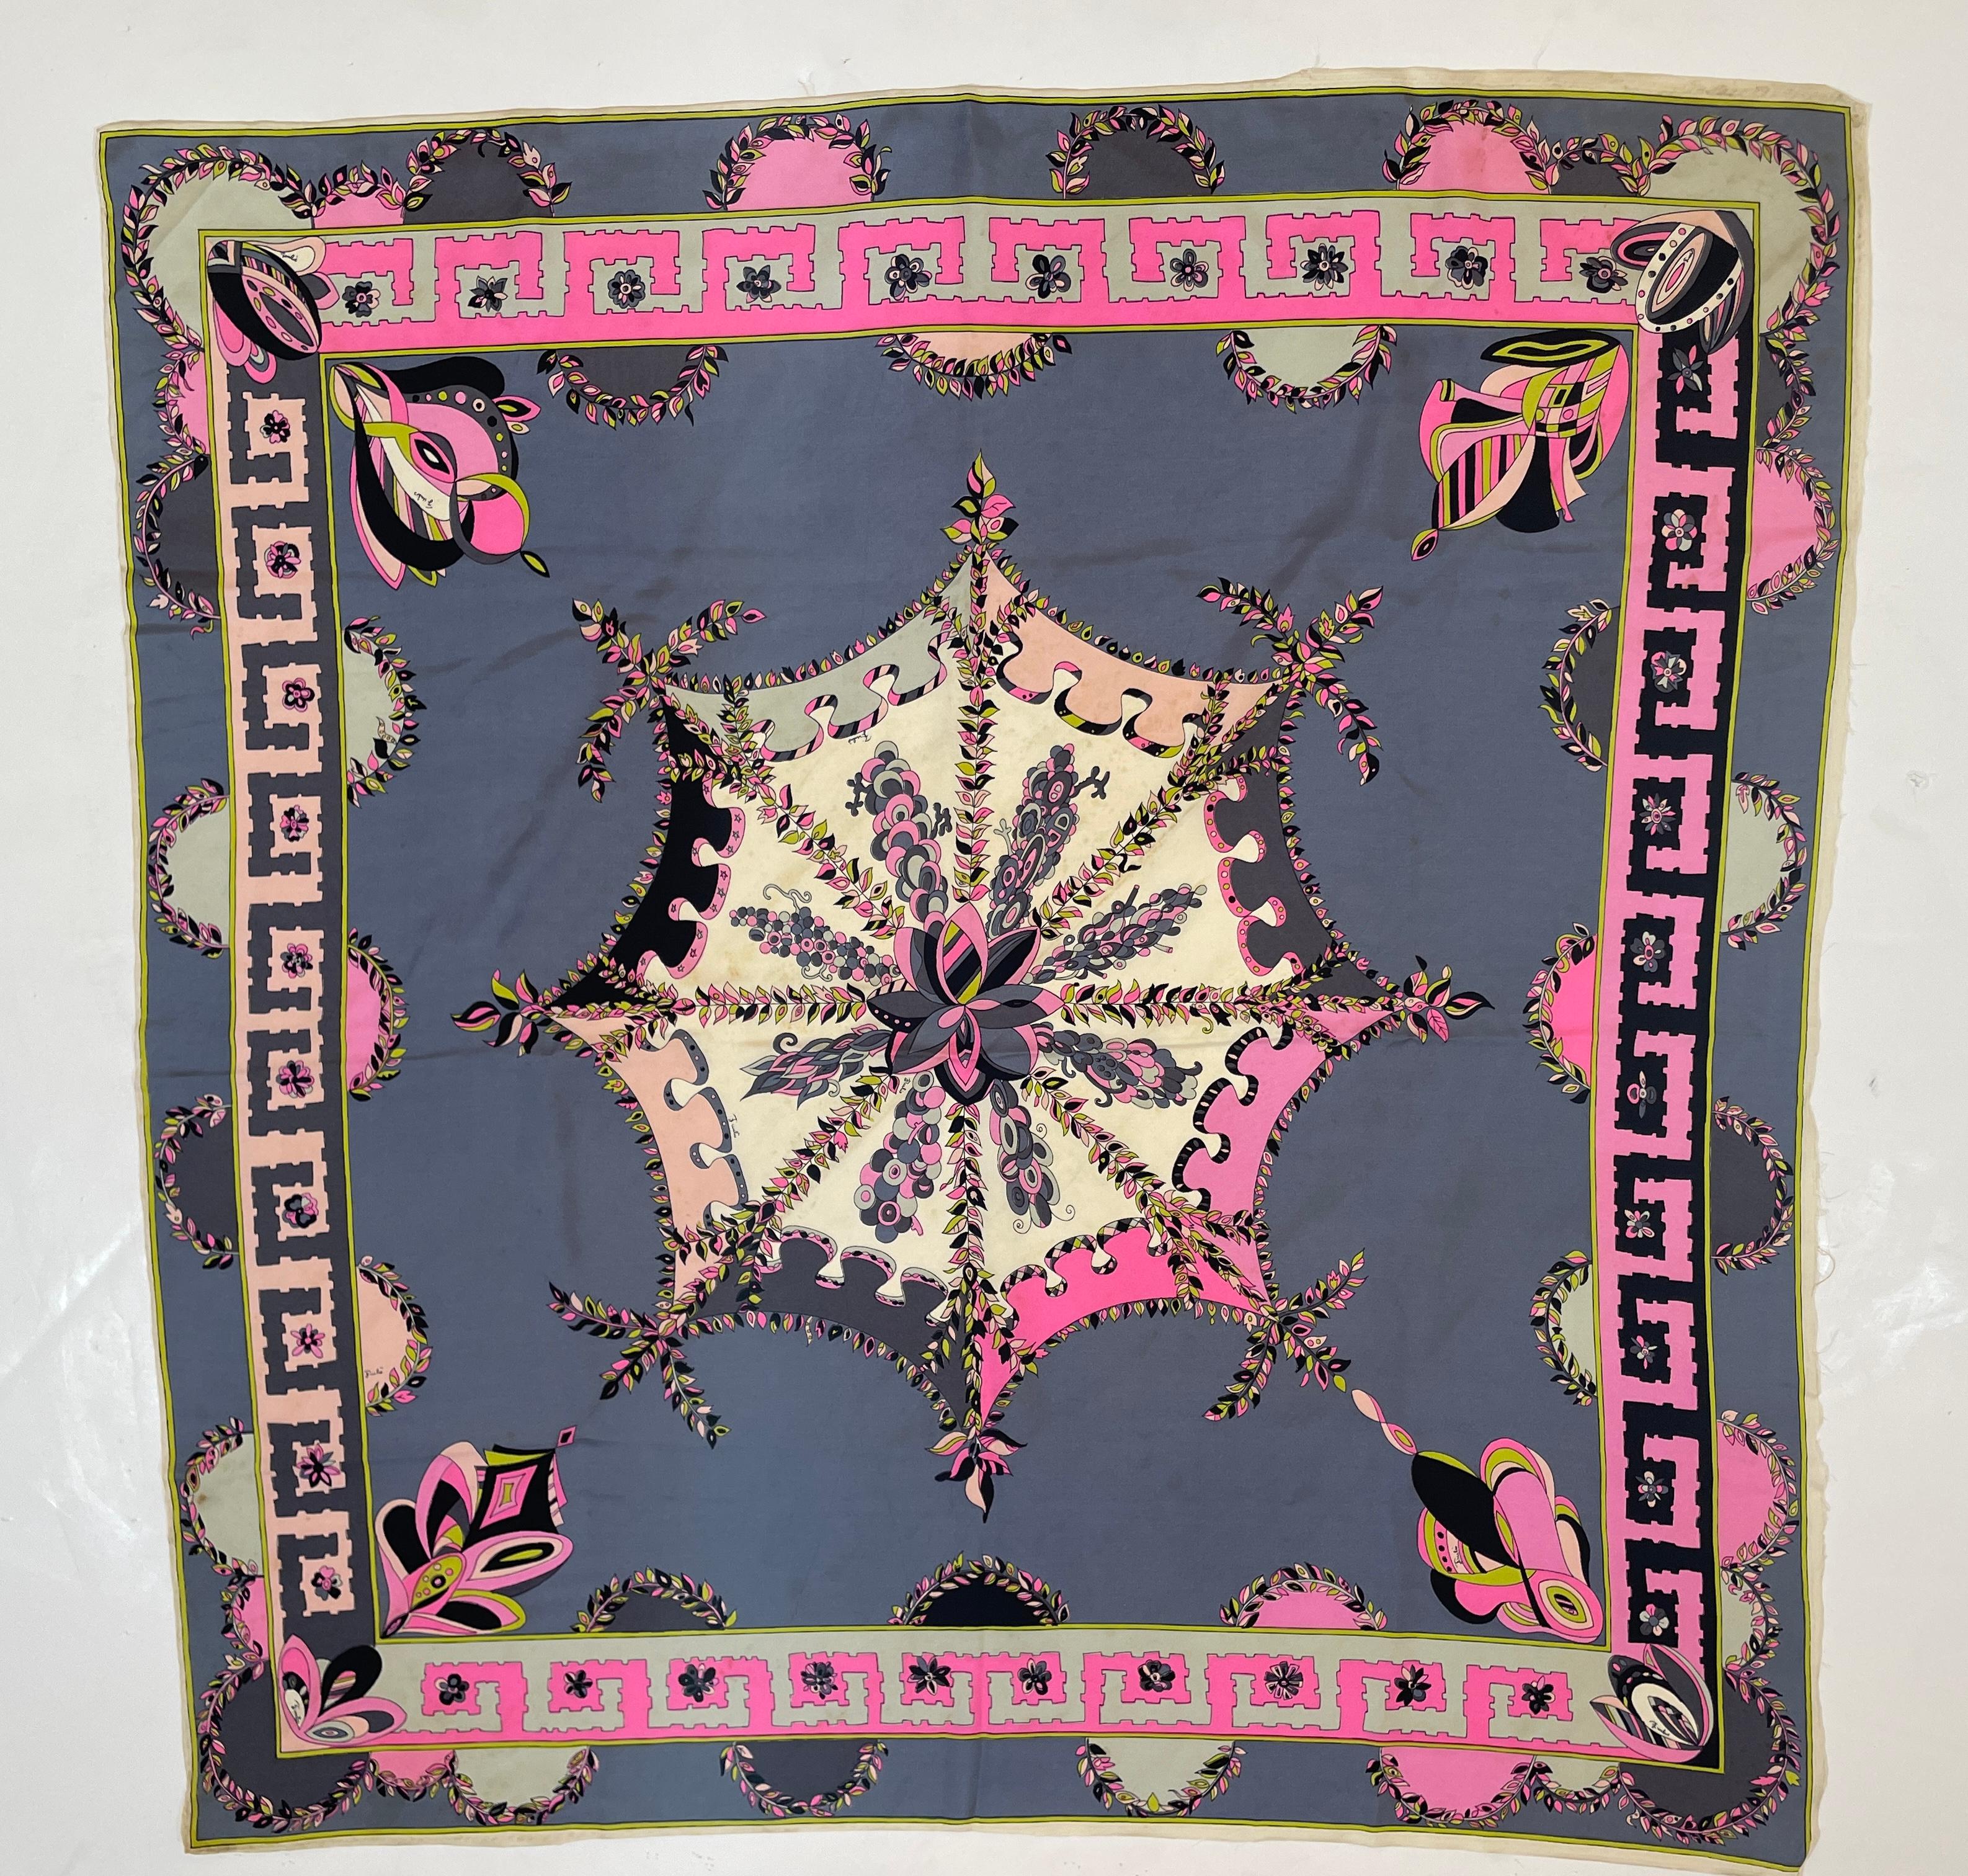 1970's Pucci Silk chiffon scarf in geometric blues and pinks.
This stunning vintage Italian Emilio Pucci silk scarf is a beautiful and colorful abstract design. This Italian vintage Pucci square silk scarf is of luscious colors of hues of blues,